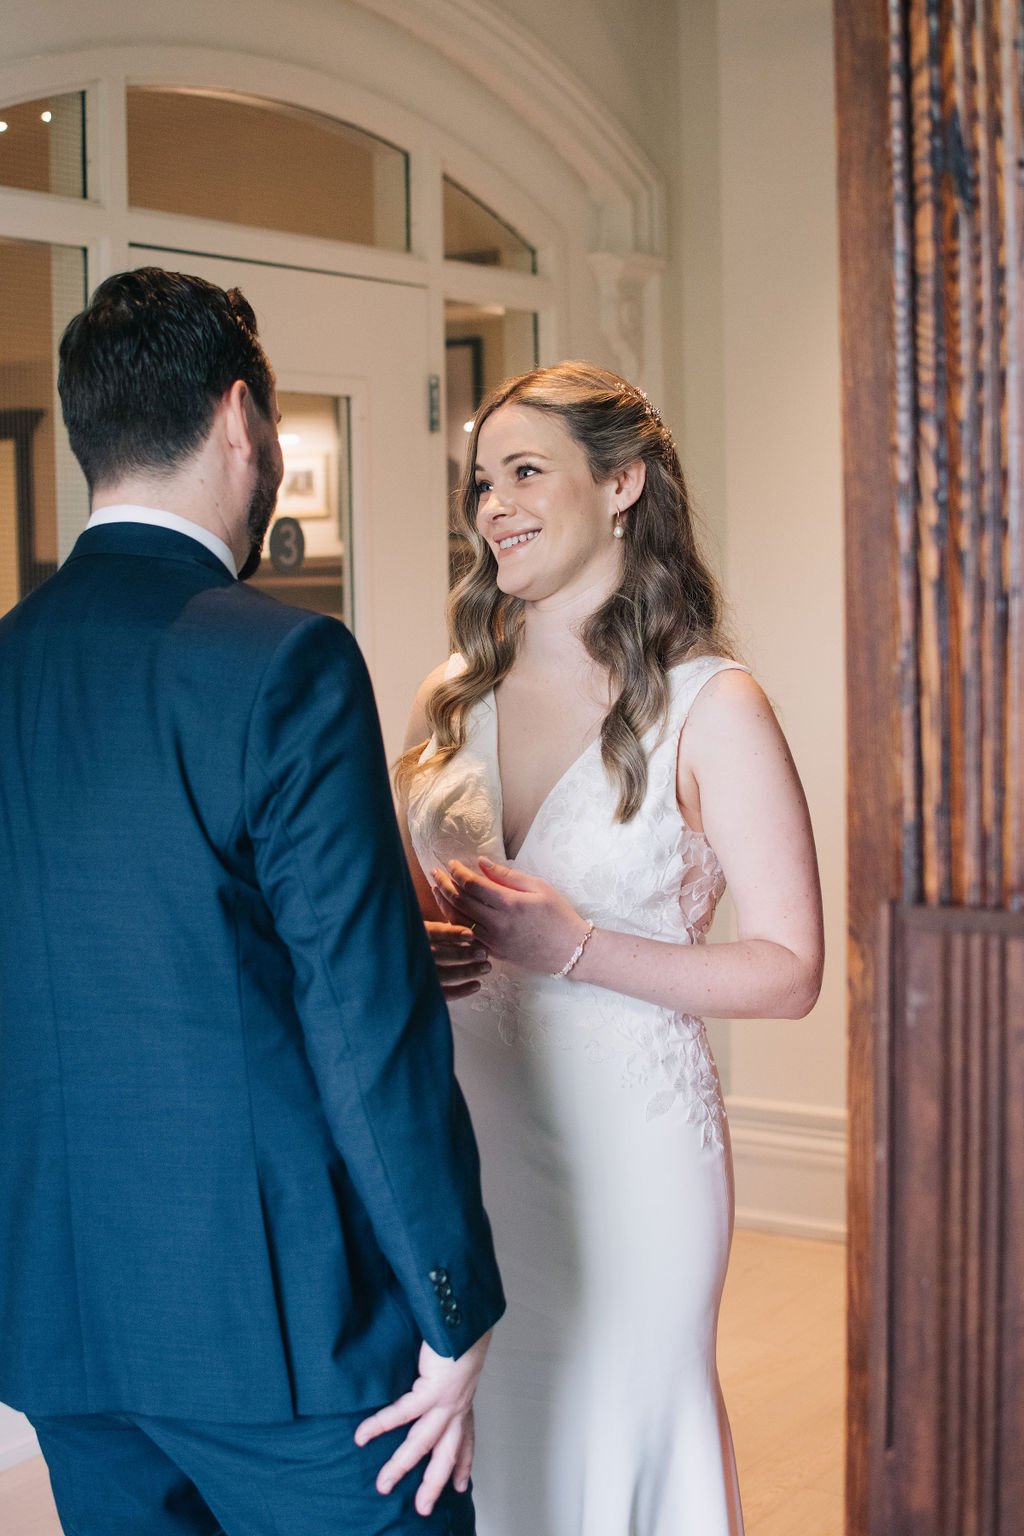 Heartfelt first look for couple's wedding day at Toronto's Gladstone House Hotel